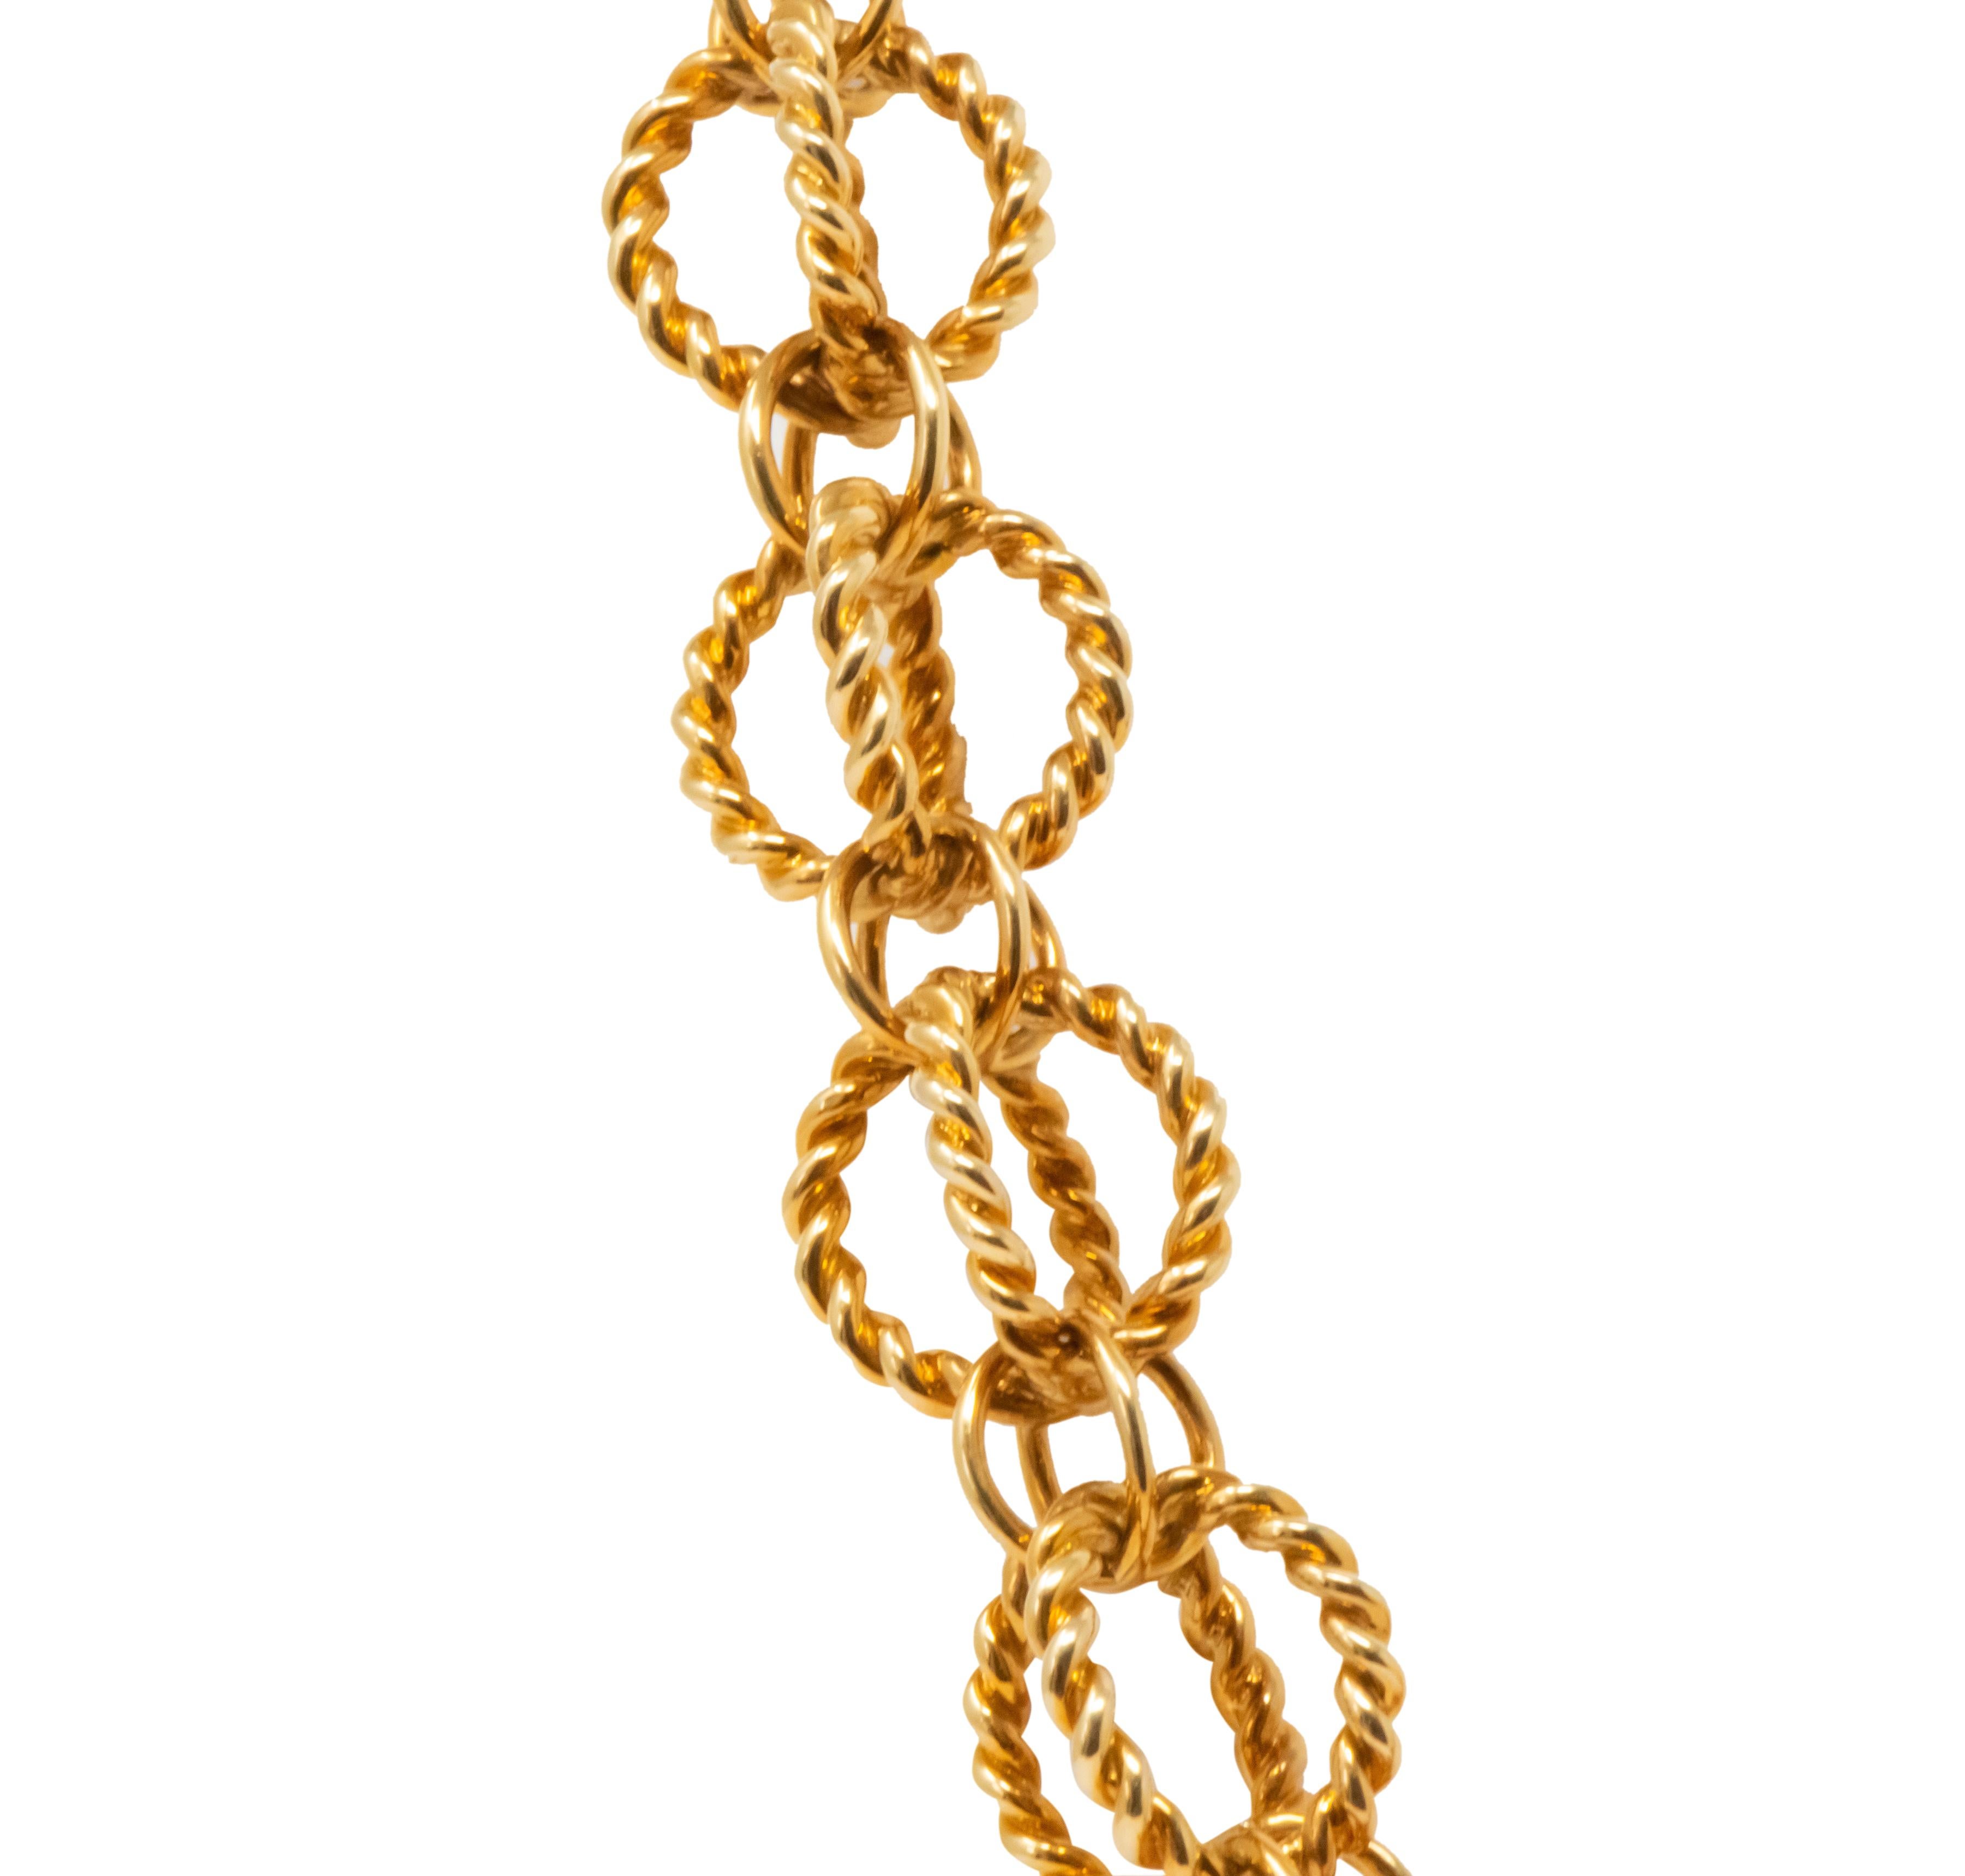 Link style necklace featuring large cage-like links comprised of a twisted rope motif

Interconnected with smaller cage-like polished gold links

Completed by concealed swinging hinged clasp with figure-eight safety

Fully signed Schlumberger and